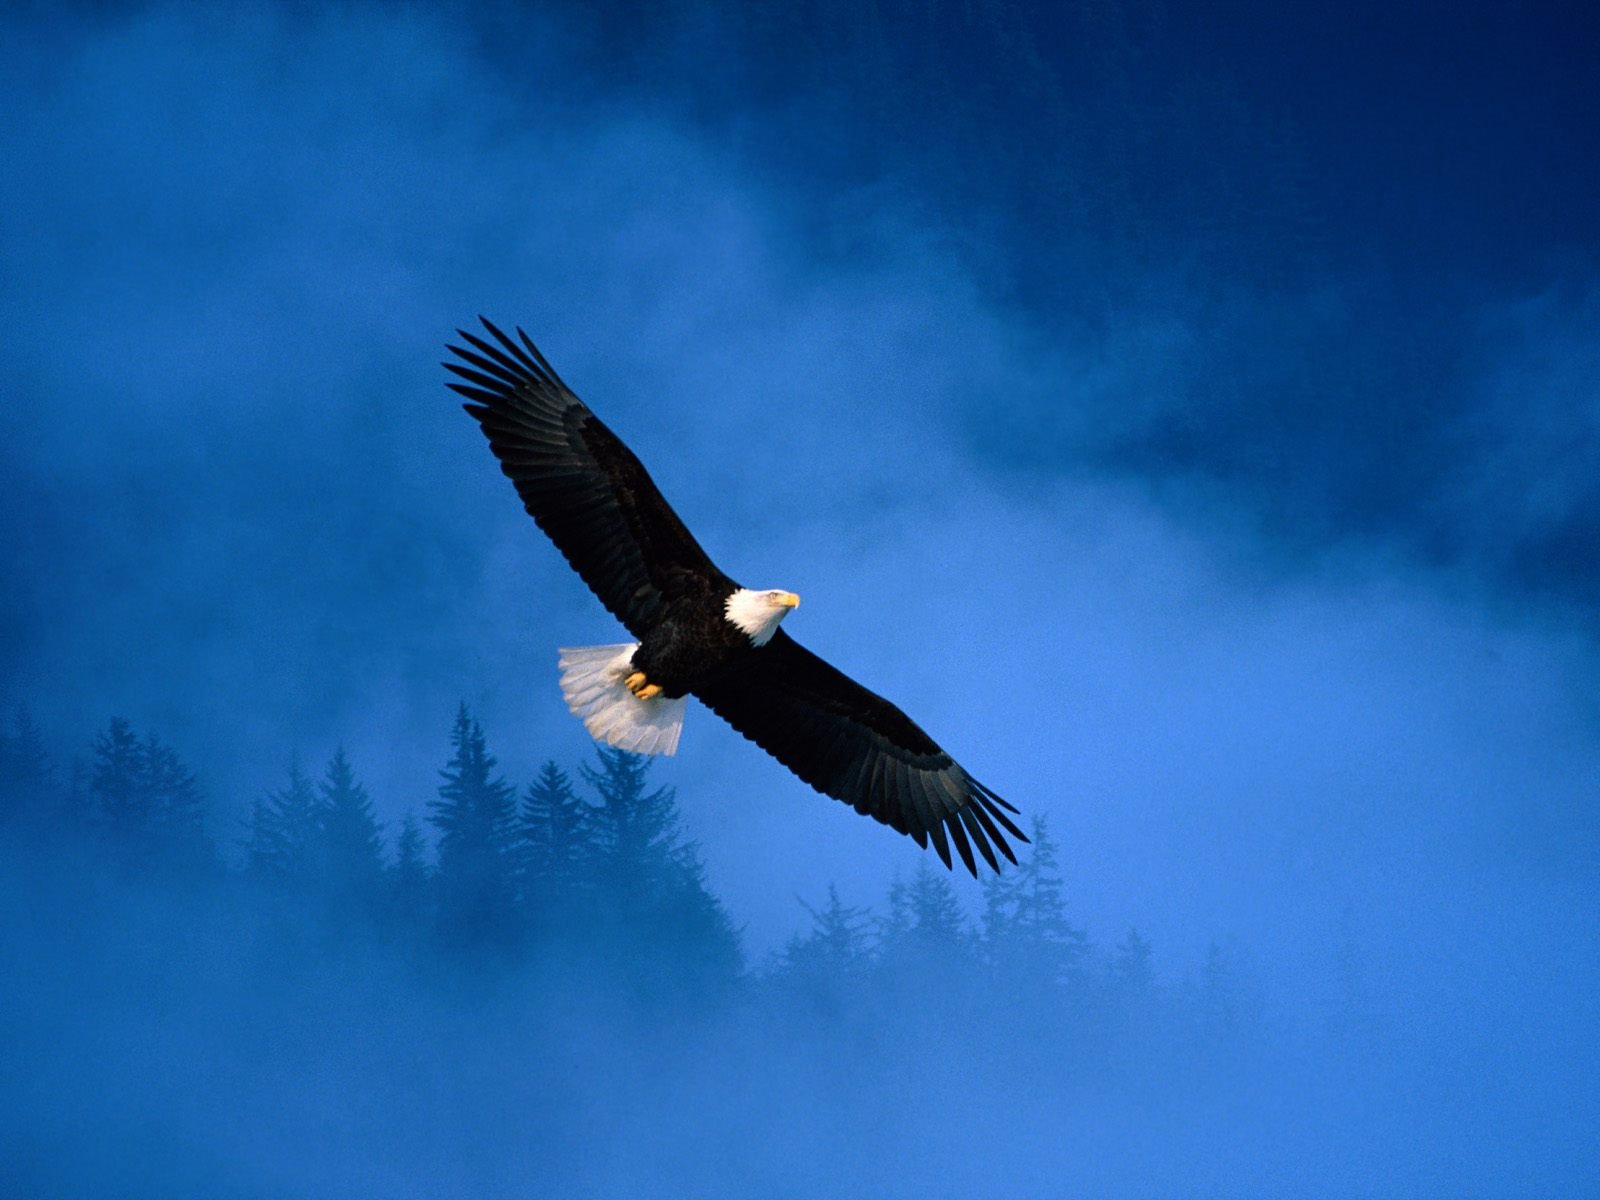 Flight of Freedom Bald Eagle Wallpapers HD Wallpapers